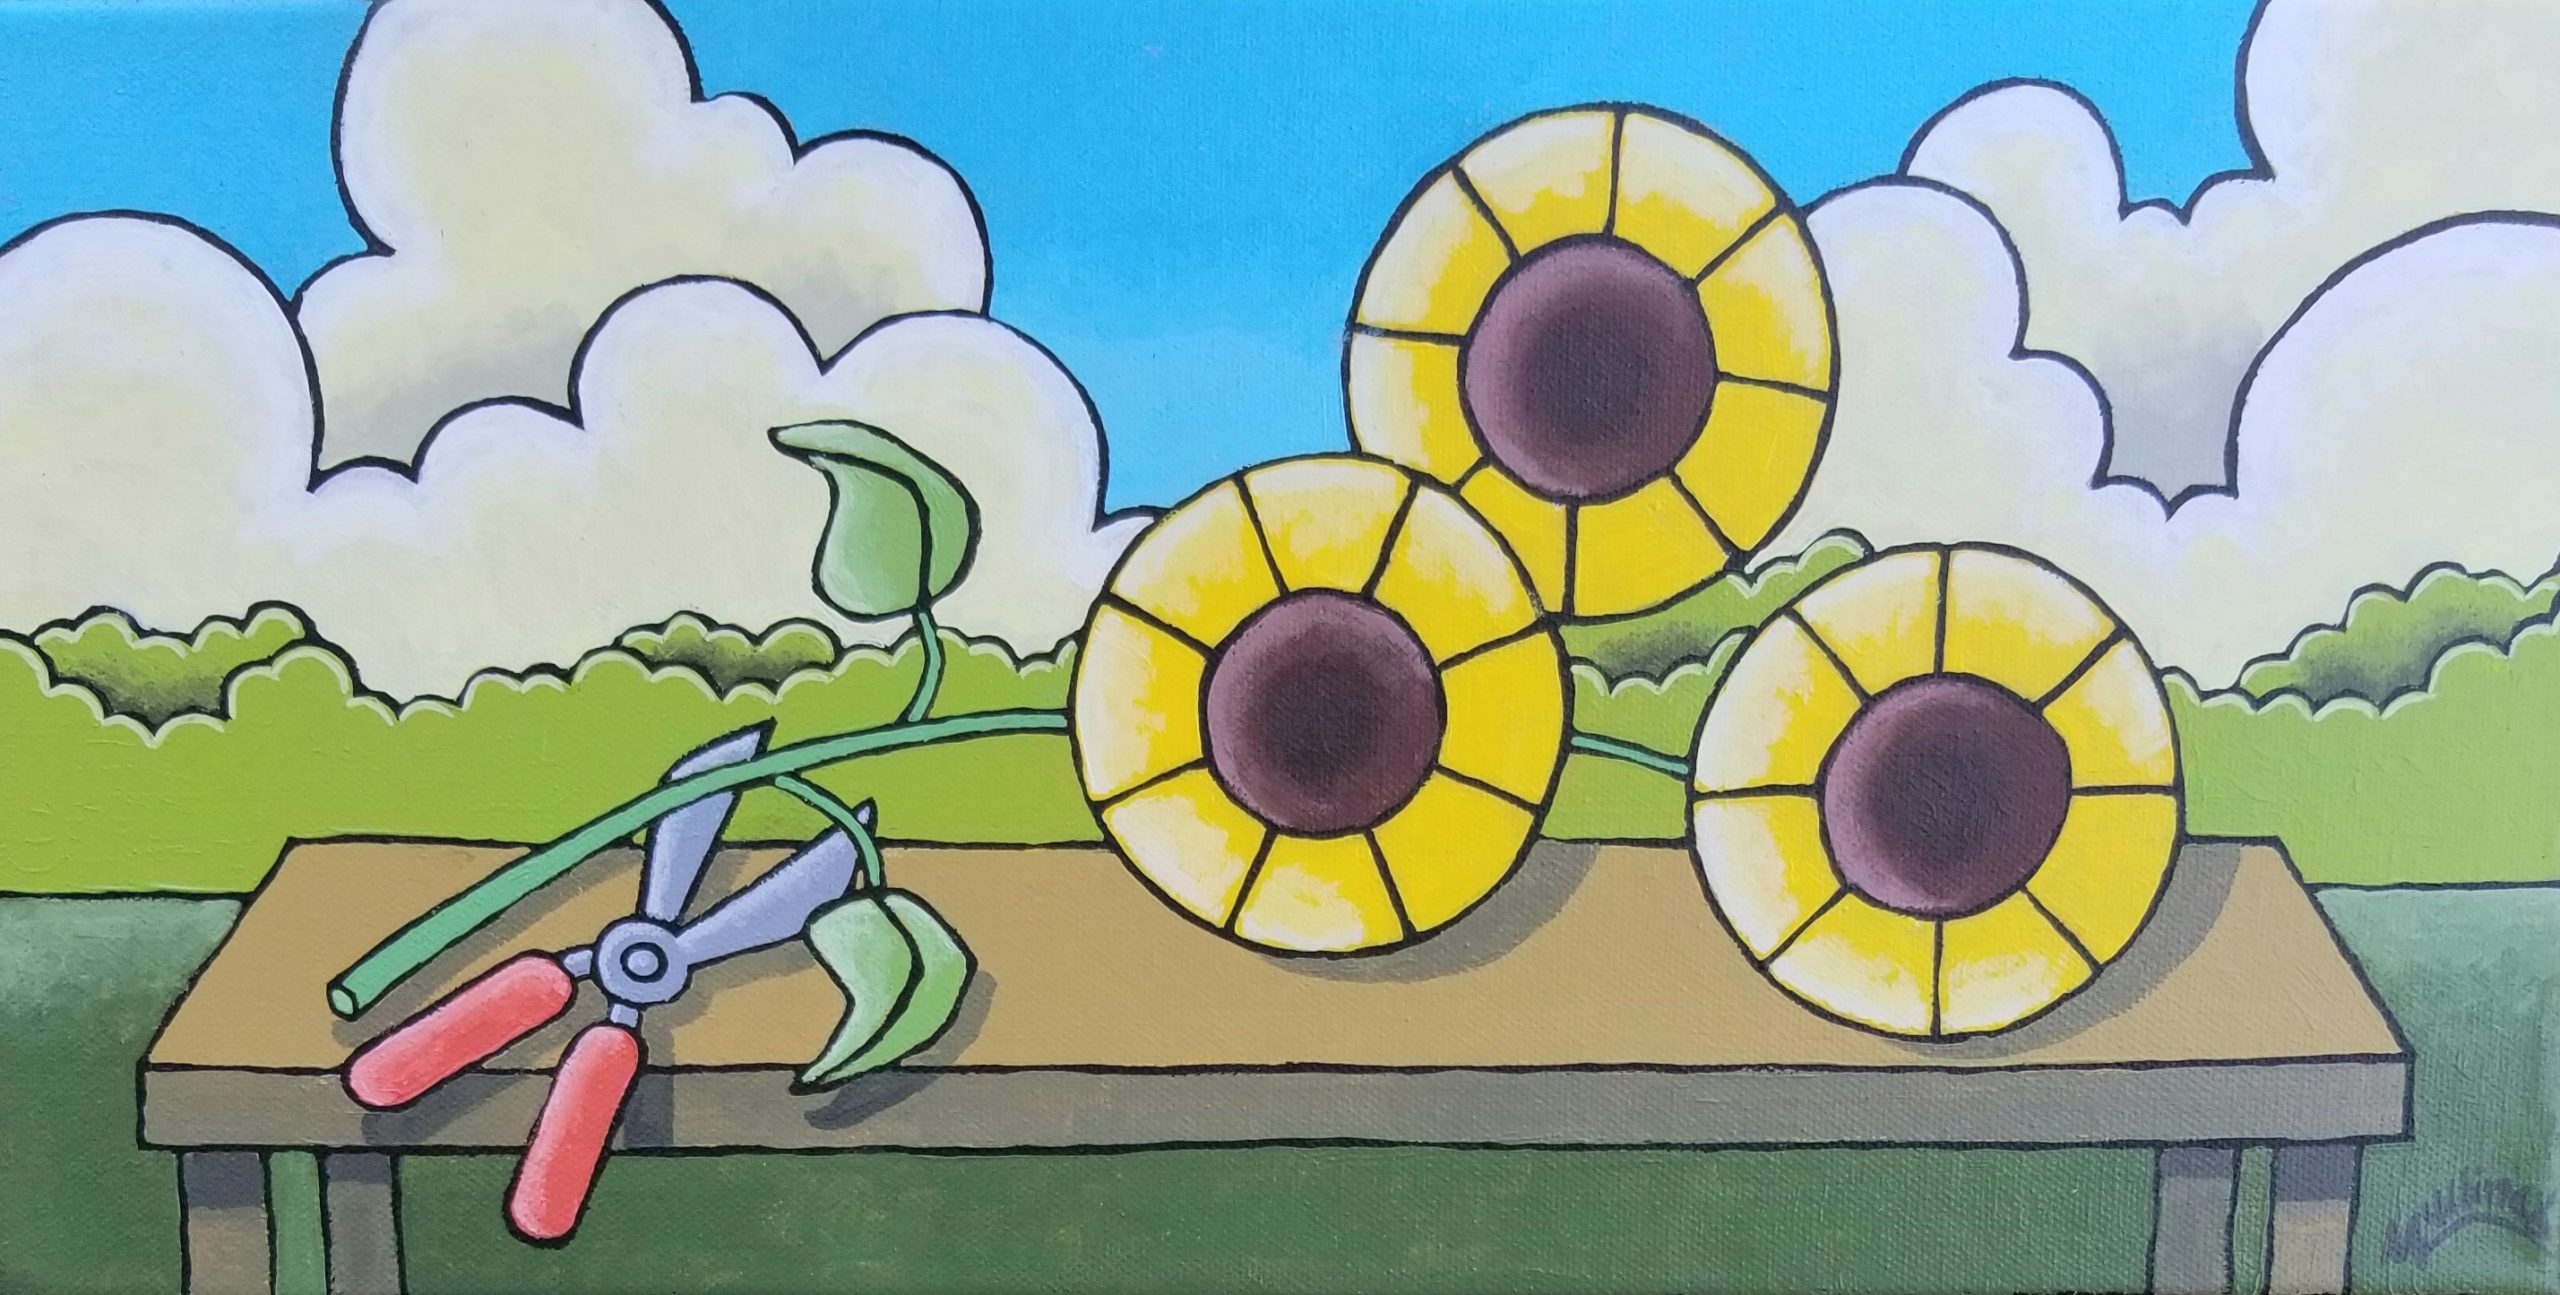 Fresh Cut Sunflowers | Painting by Kent Mullinax of Cartersville, Georgia | A painting of cut sunflowers laying on a wooden table alongside a pair of garden clippers with a green lawn extending to a tree line and fluffy white clouds agains a blue sky in the background